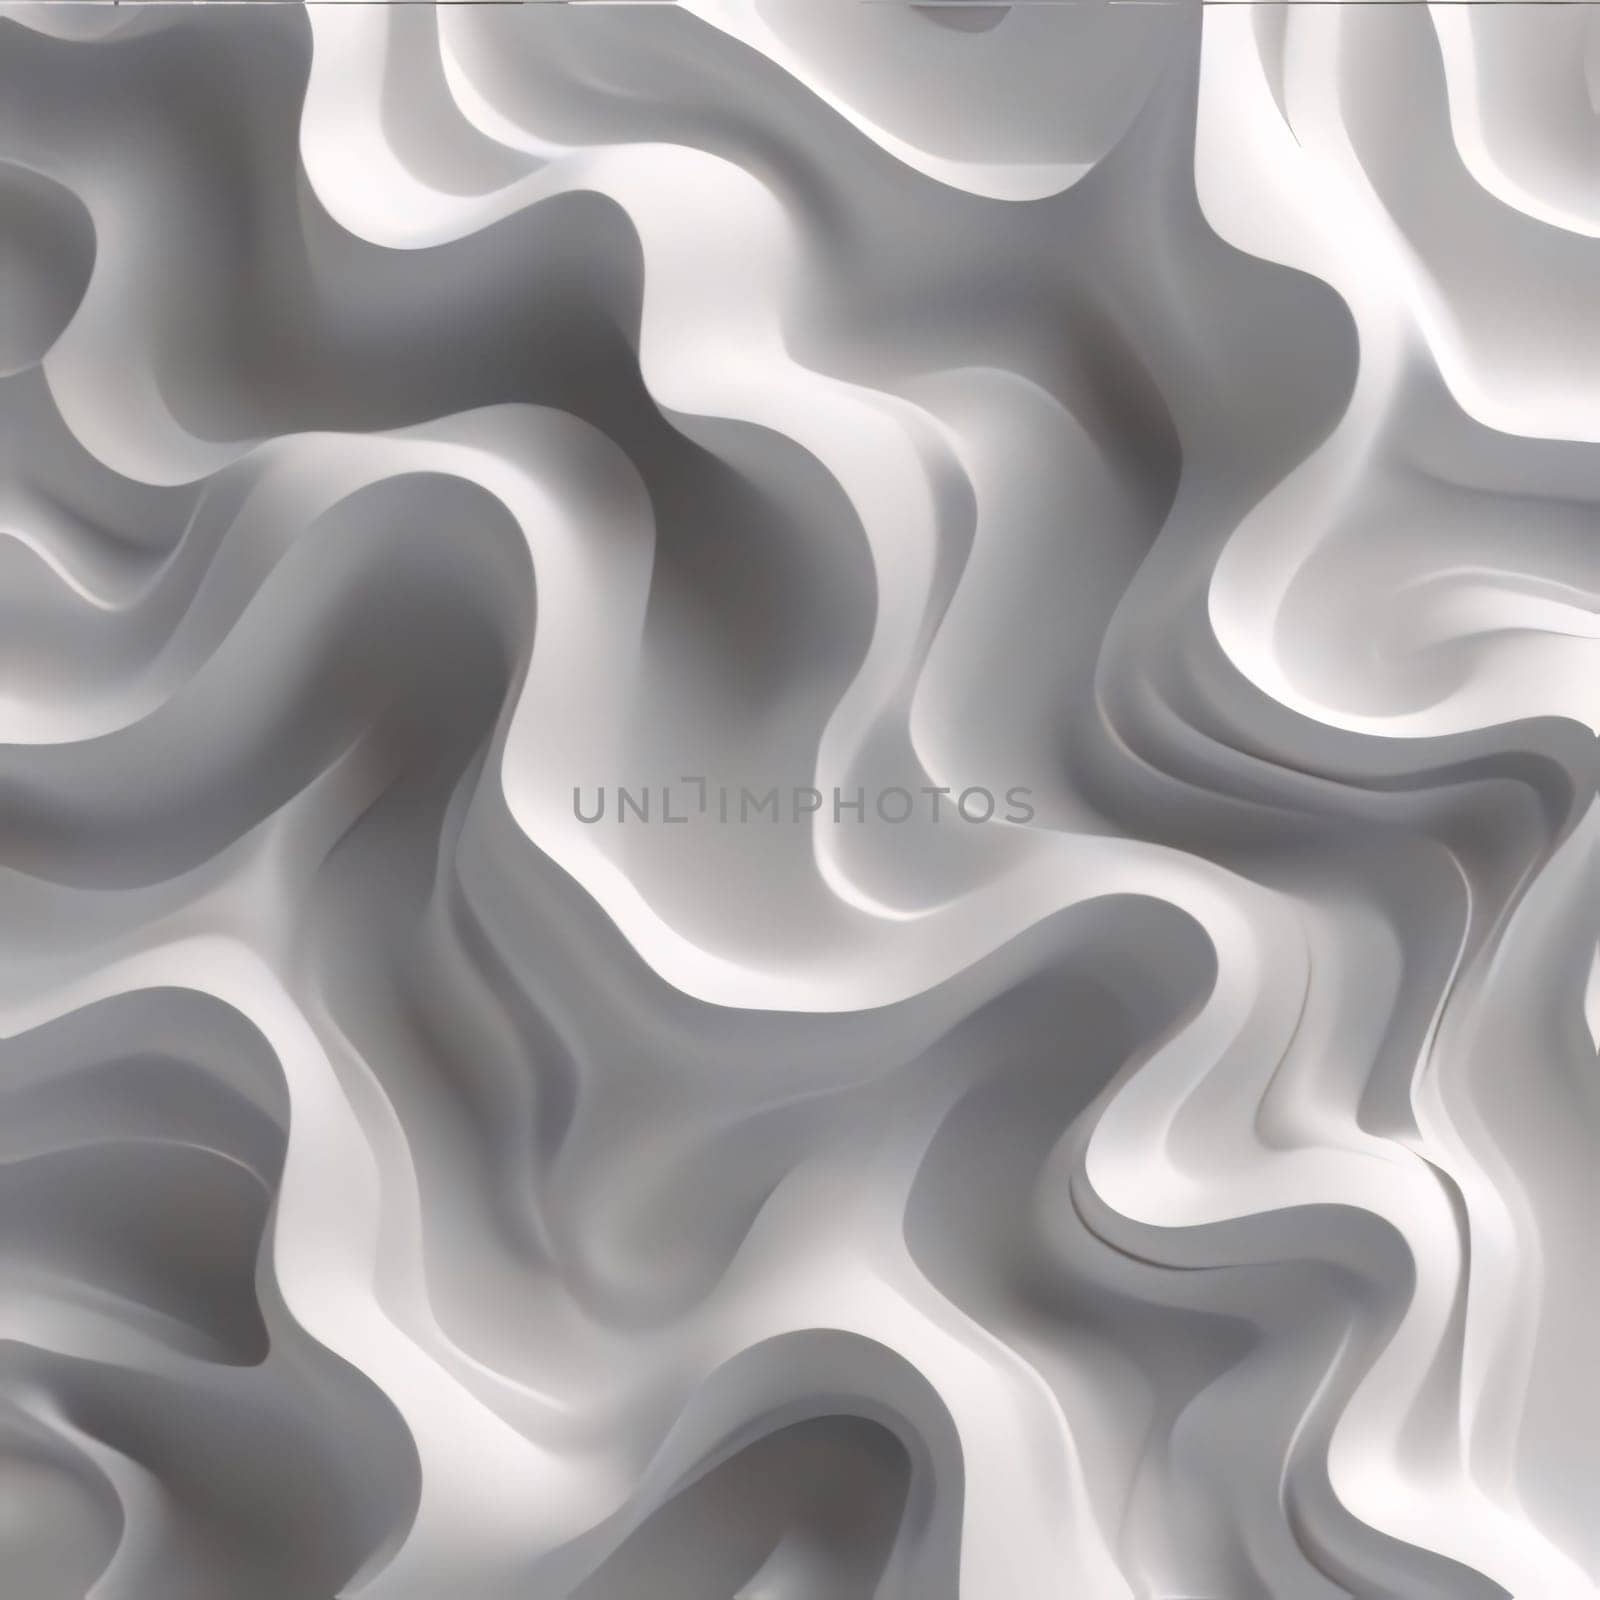 Abstract background design: Abstract wavy background. Vector illustration. Gray and white colors.